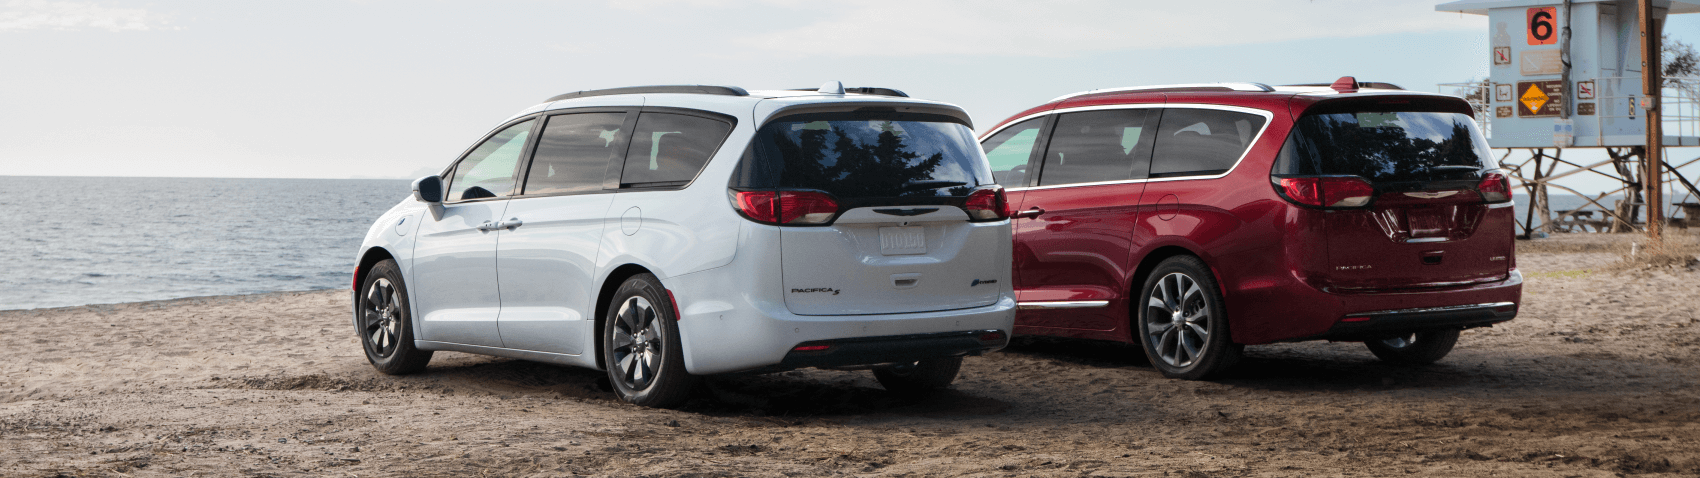 Chrysler Pacifica and Pacifica Hybrid White Red Beach